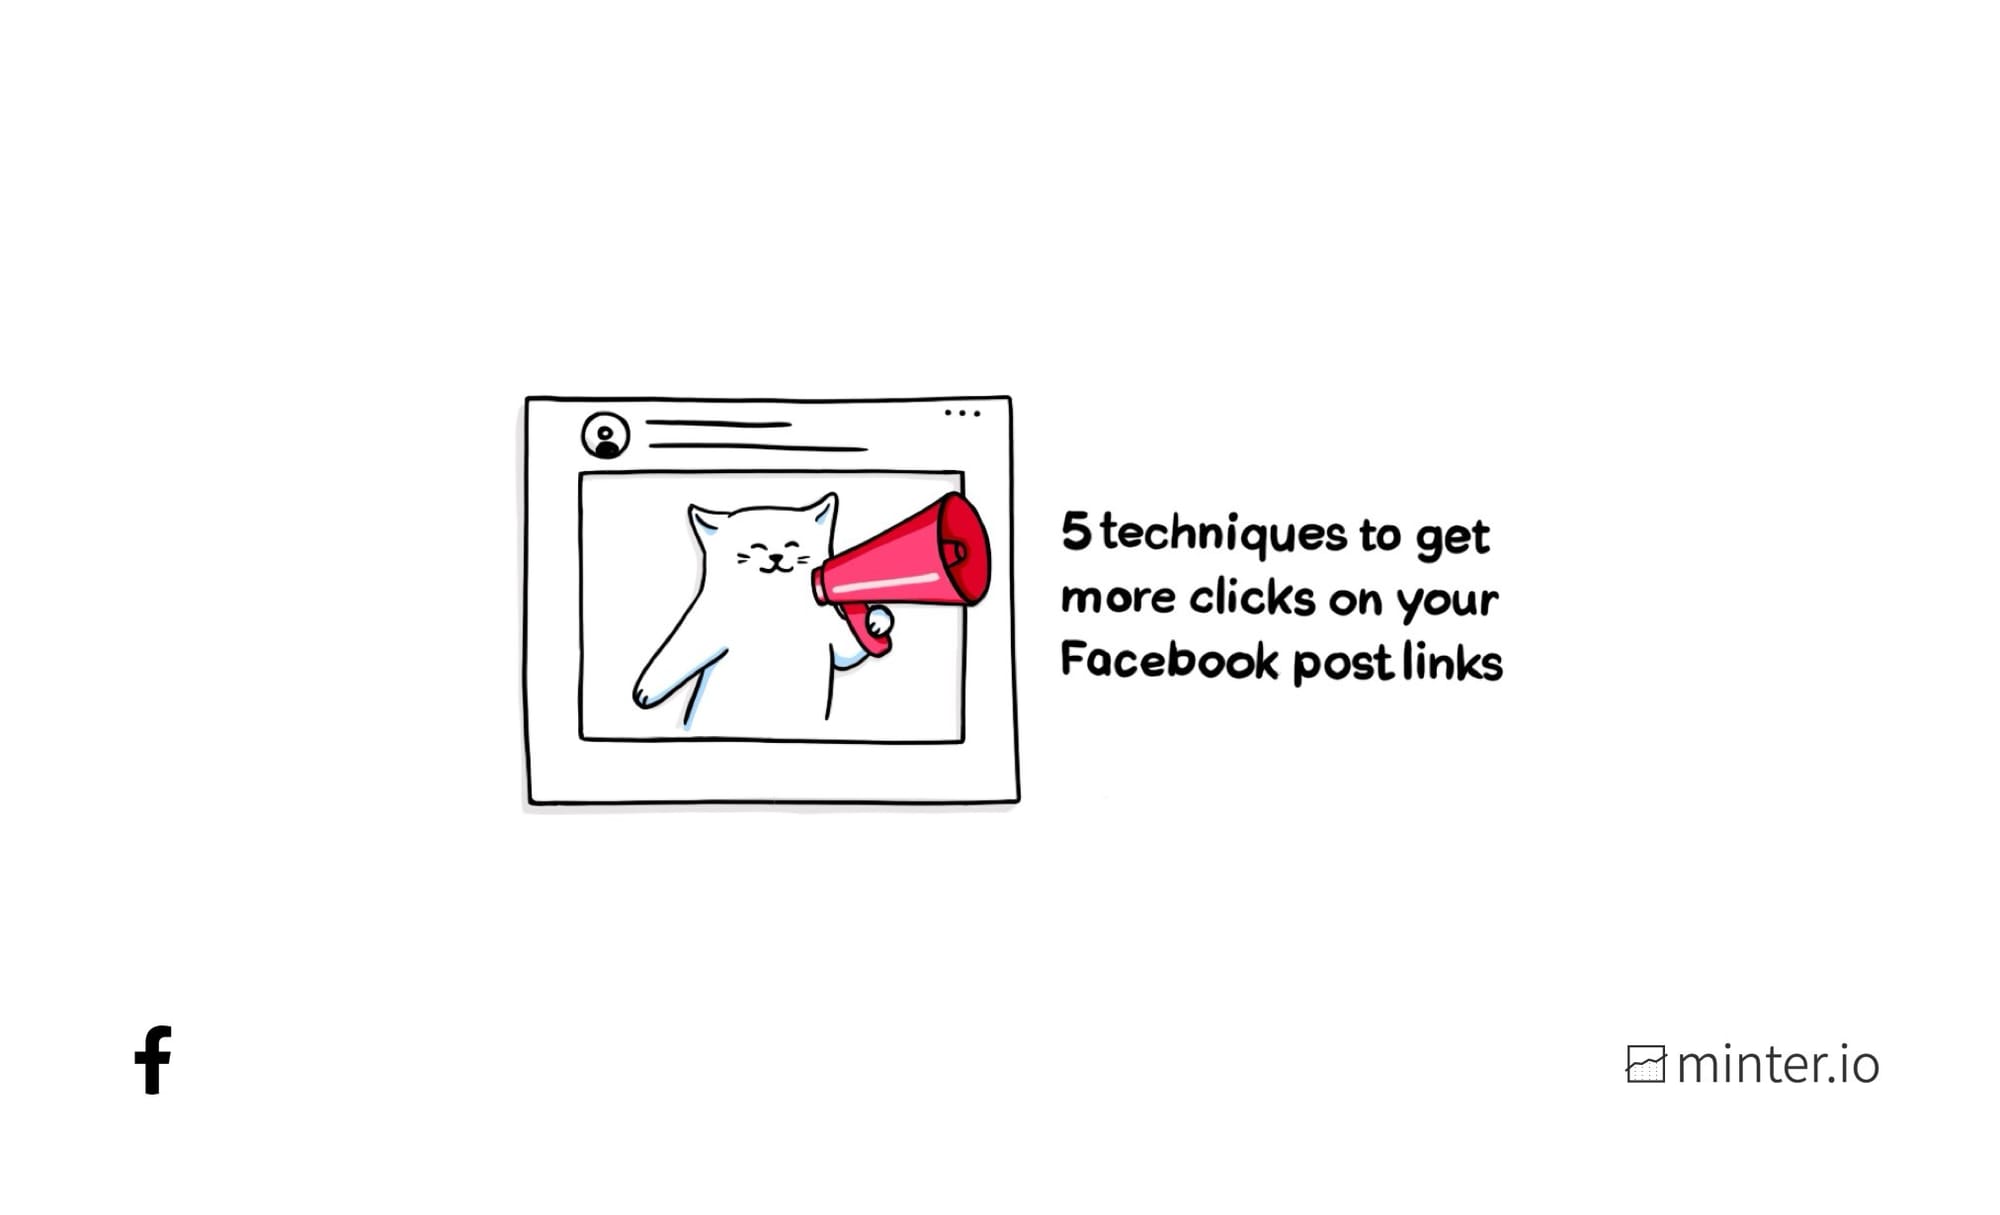 5 Tempting techniques to get more clicks on your Facebook post links